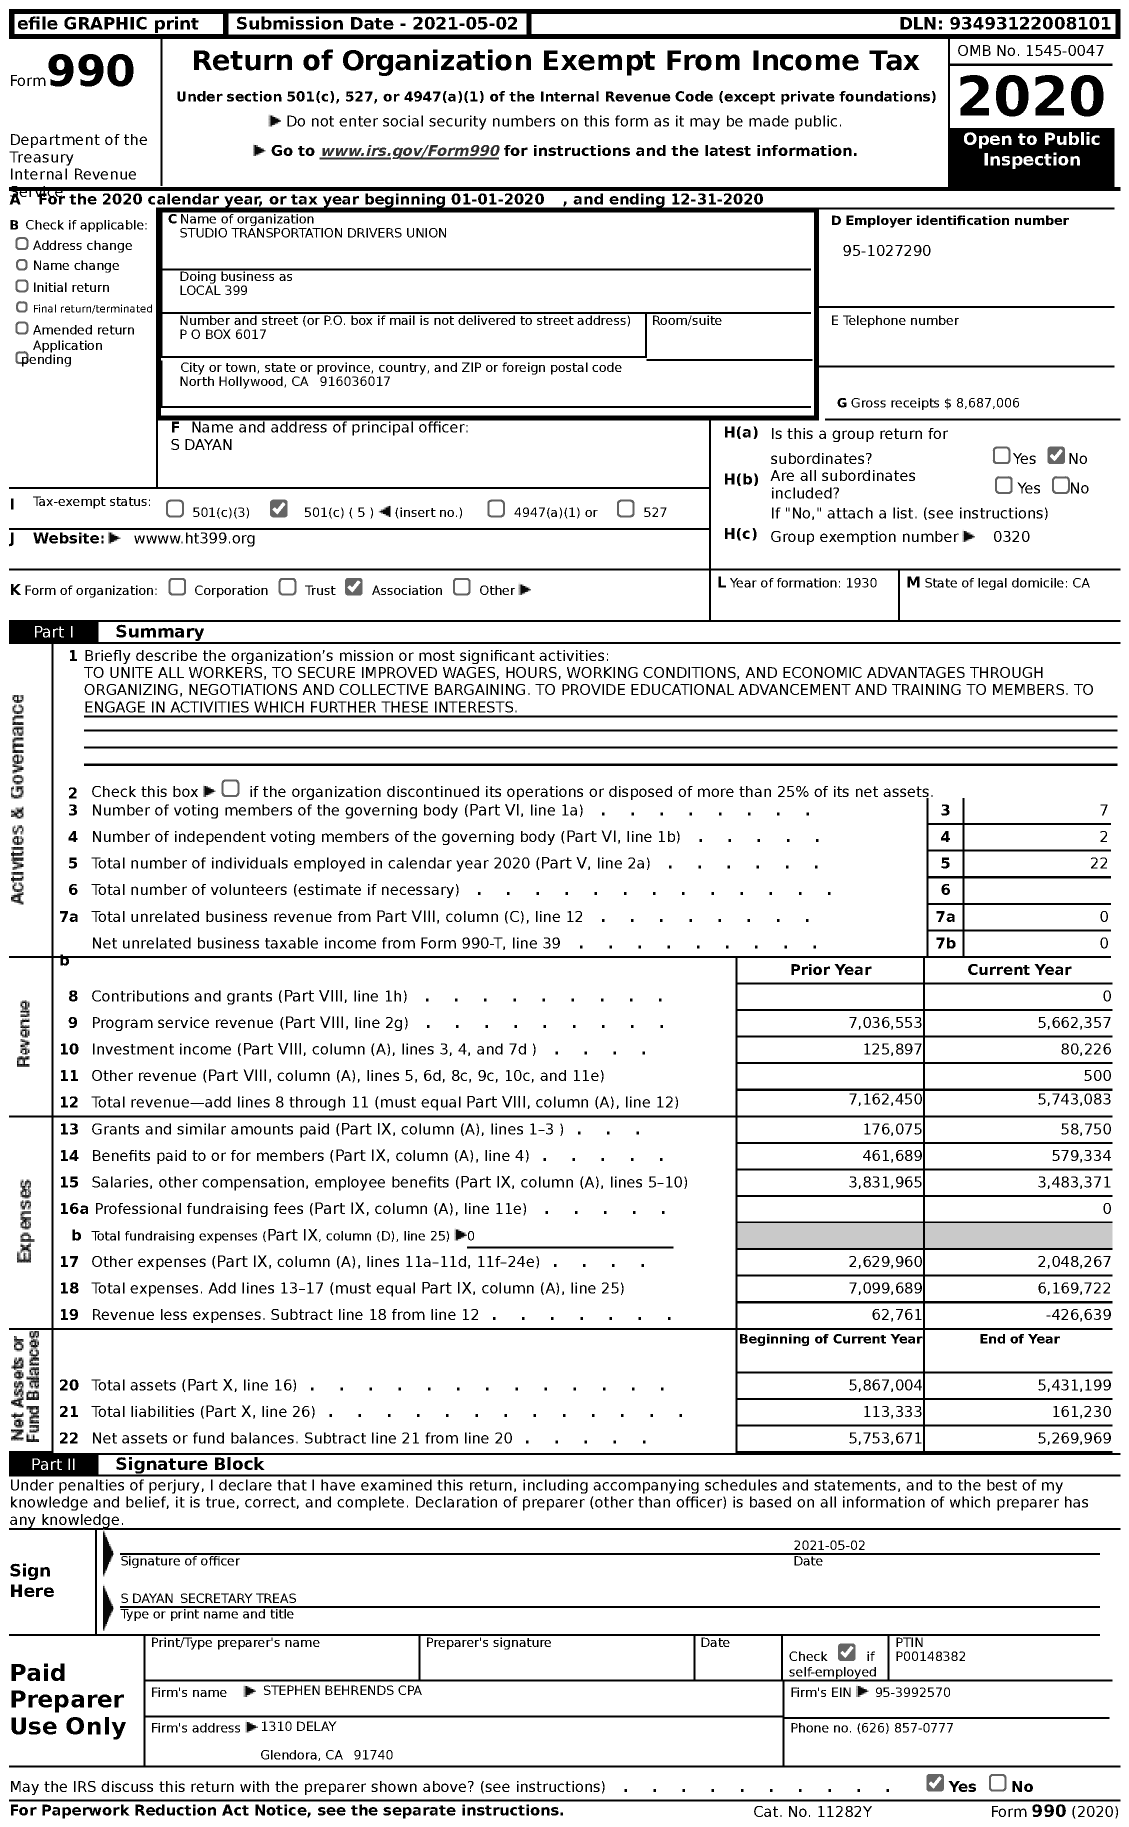 Image of first page of 2020 Form 990 for Teamsters - 399 Local Studio Transportation Dri